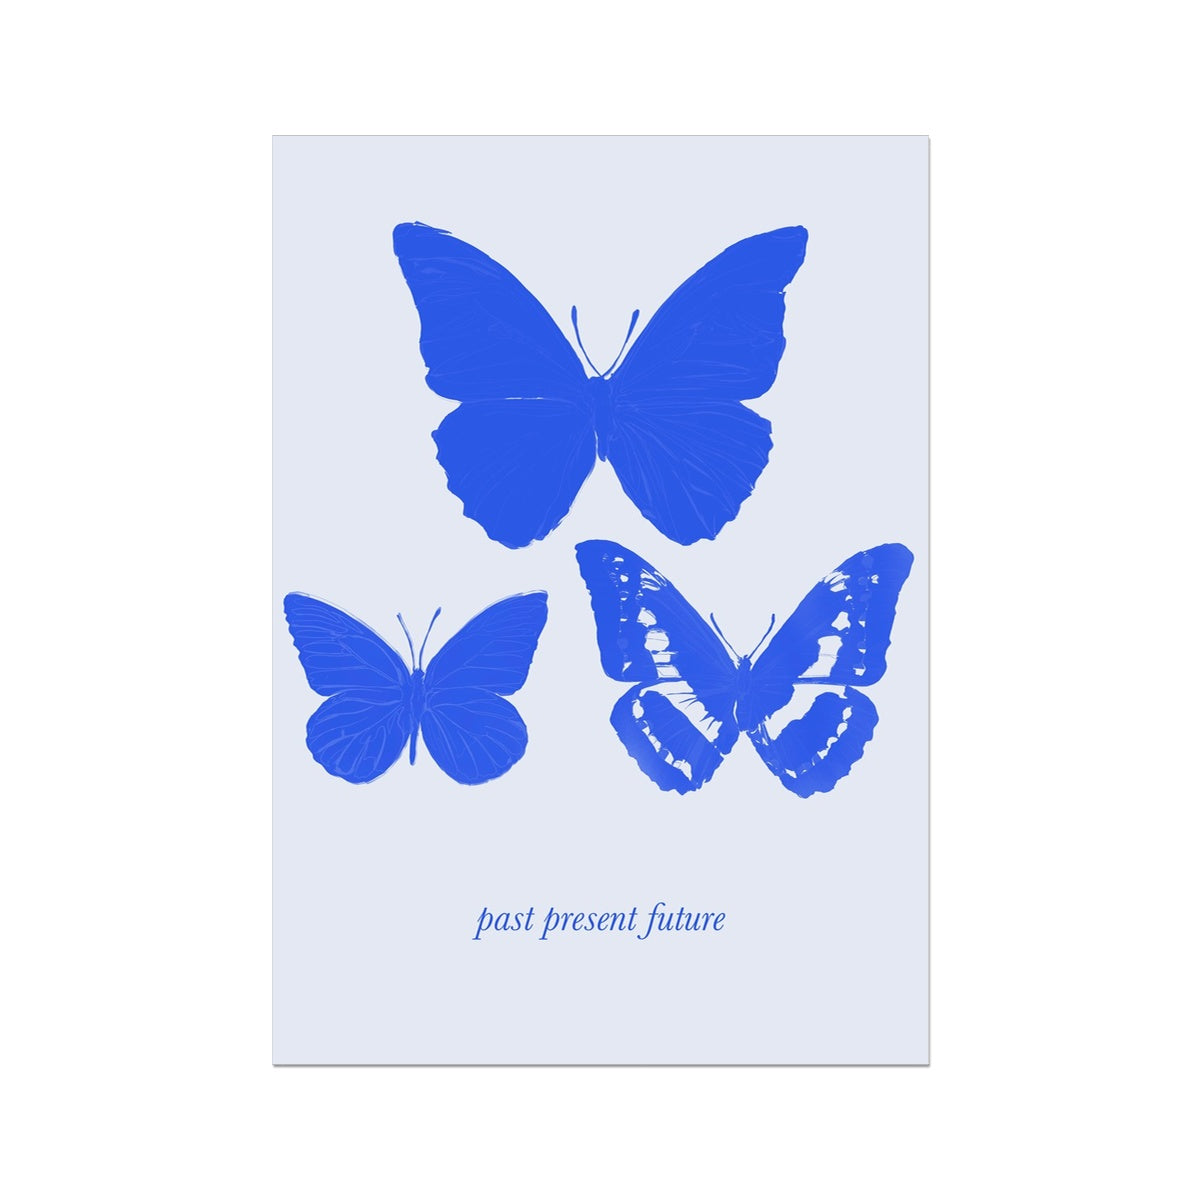 © les muses / The Butterfly Effect collection features butterfly art prints featuring illustrations of three butterflies with "past present future" typography underneath. Dreamy aesthetic posters
perfect for dorm and apartment decor